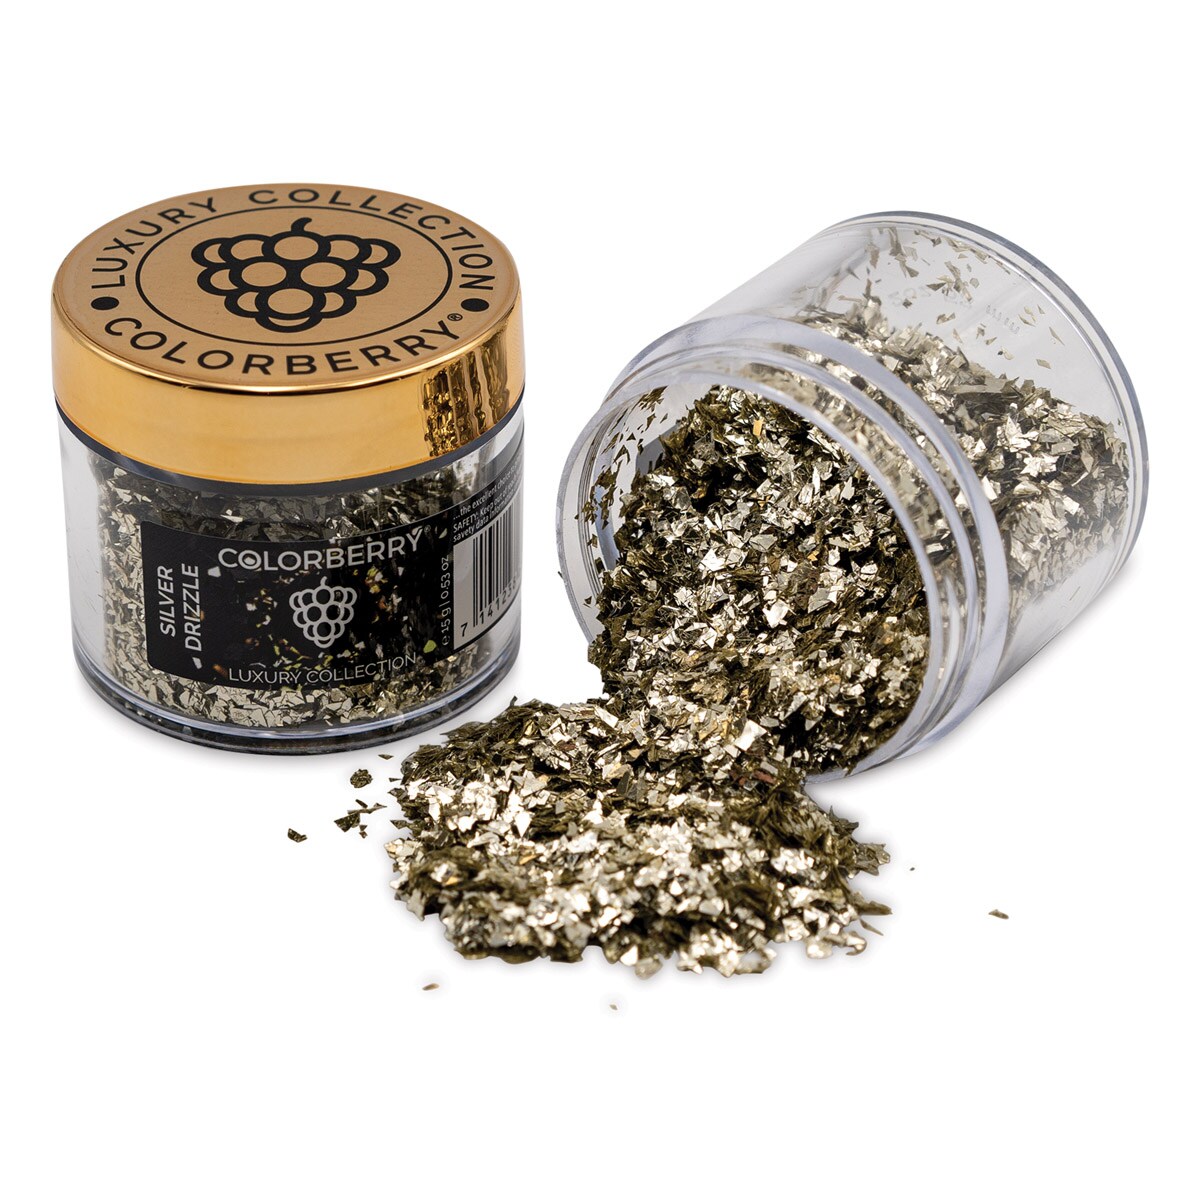 Colorberry Luxury Collection Resin Additive - Silver Drizzle, 15 g, Jar